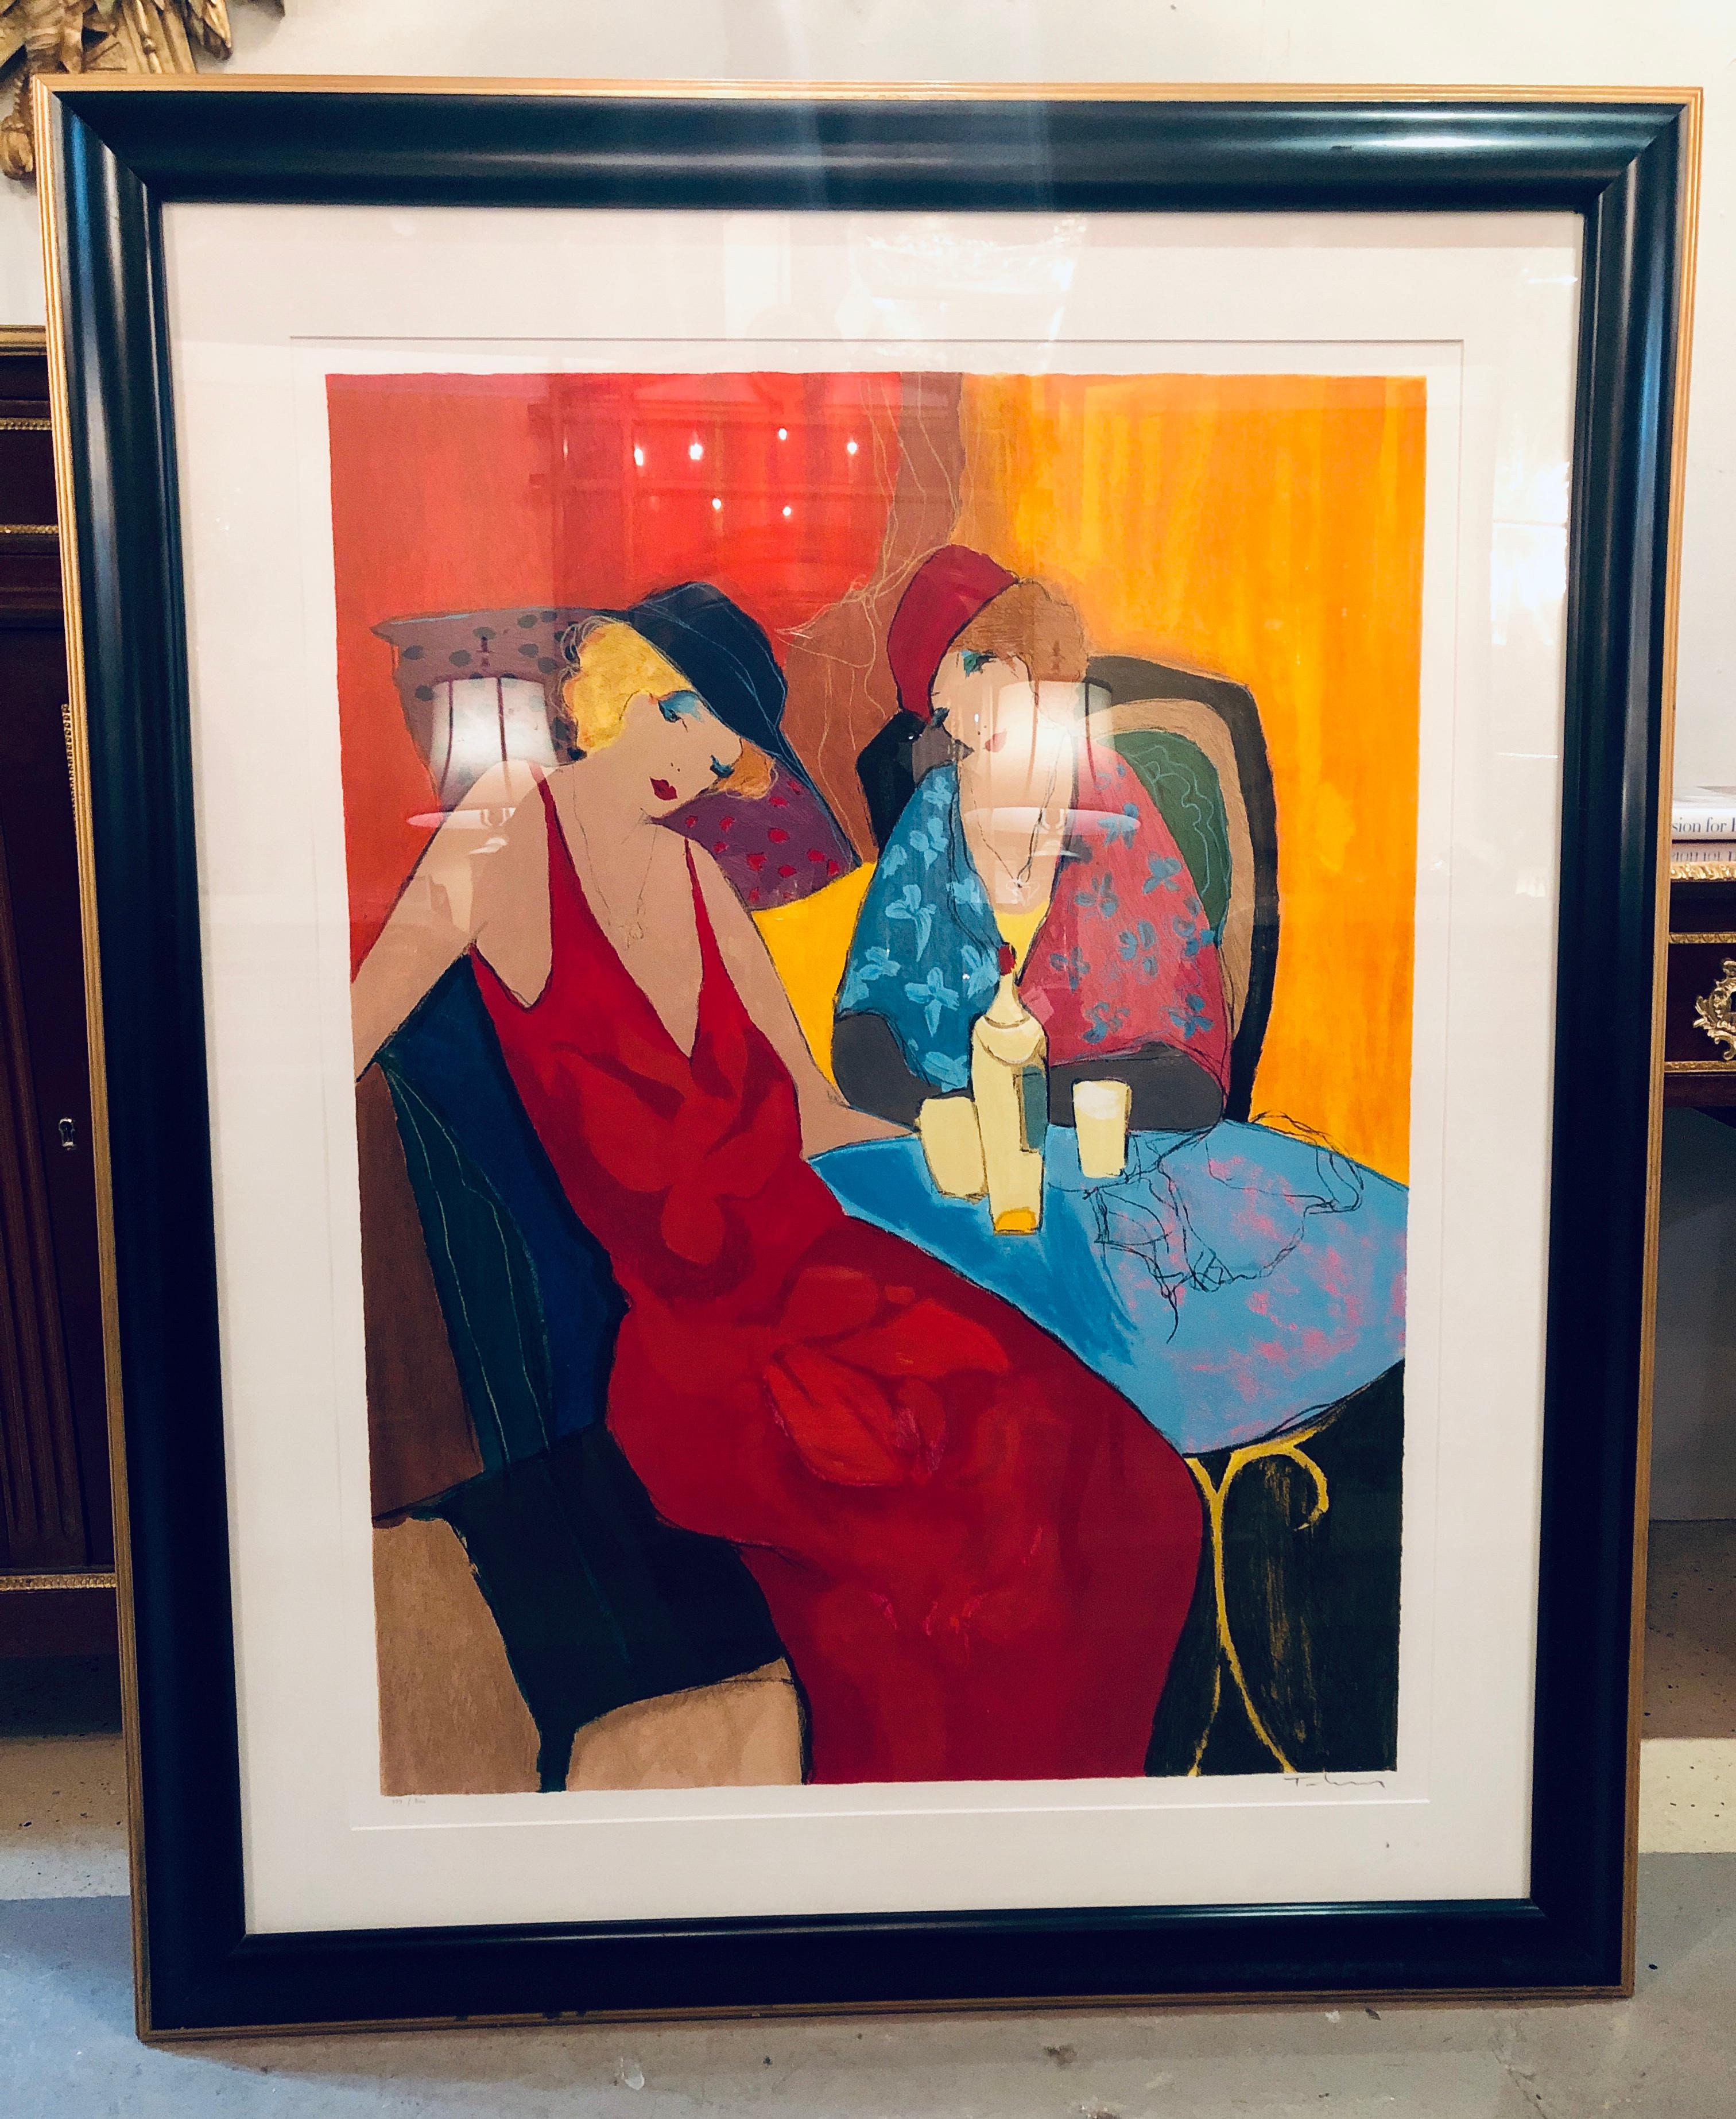 Itzchack Tarkay Serigraph (1935-2012) signed and numbered in fine frame Itzchack Tarkey Serigraph (1935-2012). This fine decorative work of art is framed in a Hollywood Regency style frame of ebony with a gilt gold border. 

Itzchack Tarkay